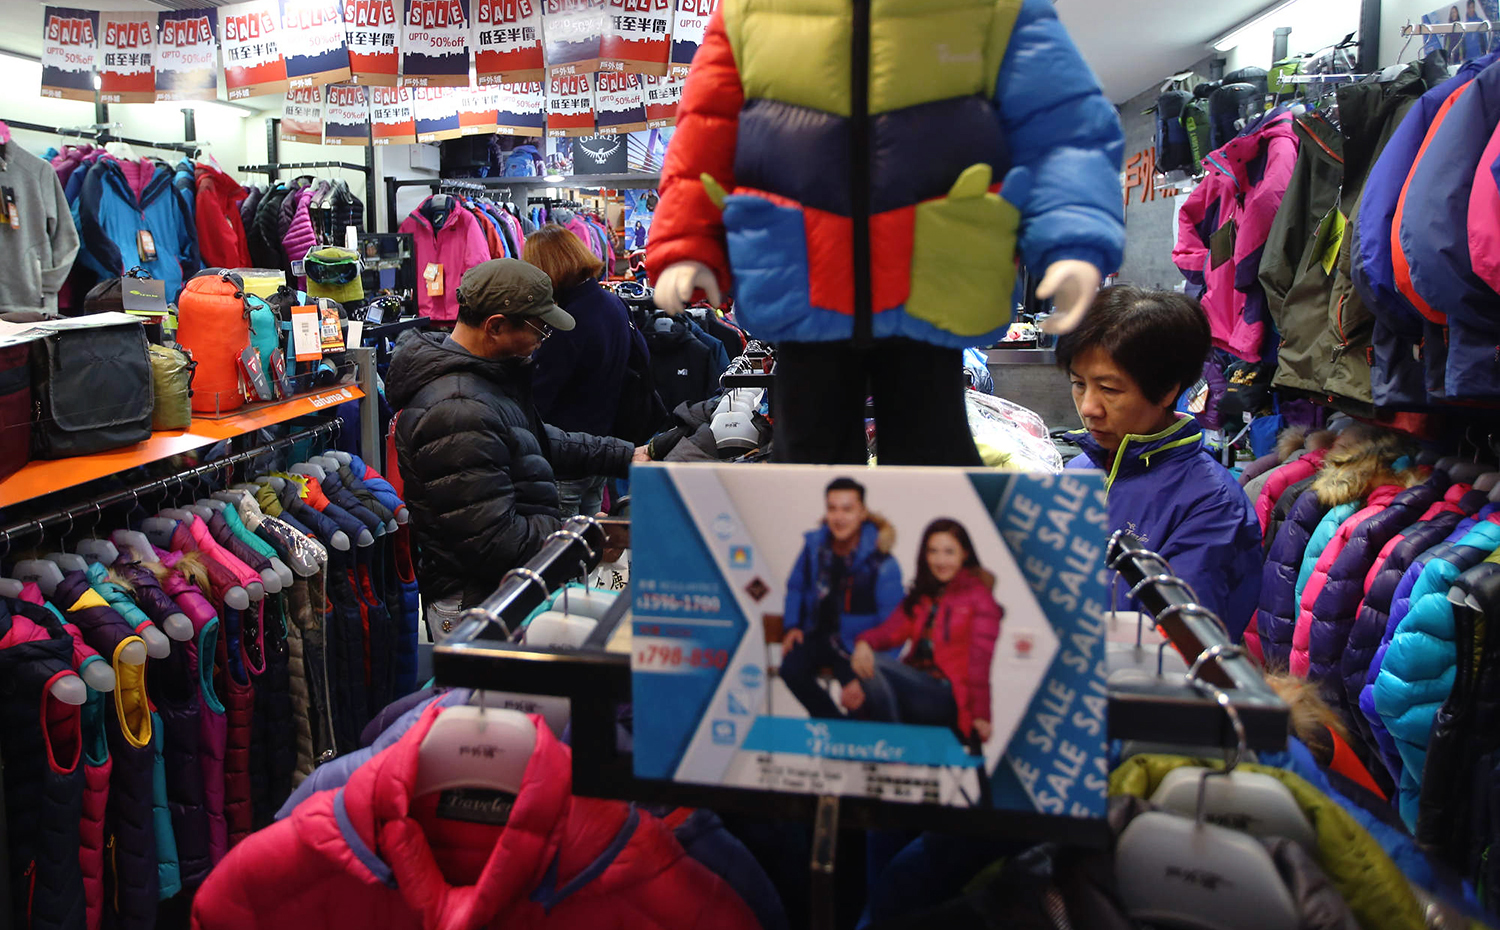 People looking for down jackets ready for the coming cold weather. SCMP/Sam Tsang